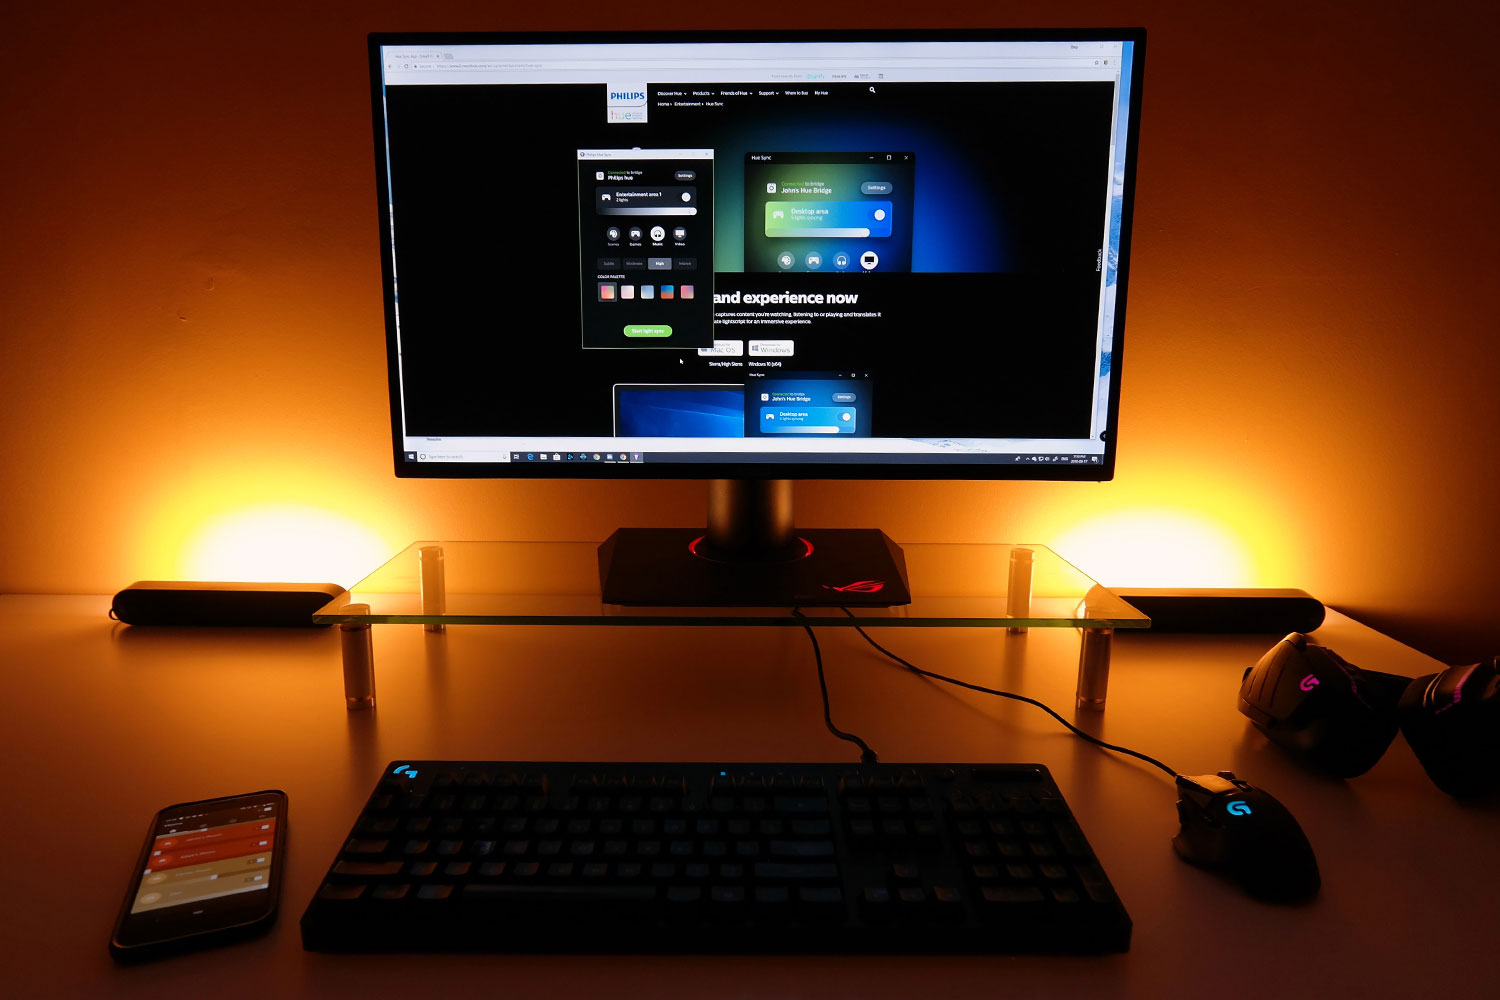 Review: Philips Hue Play light bar – Pickr